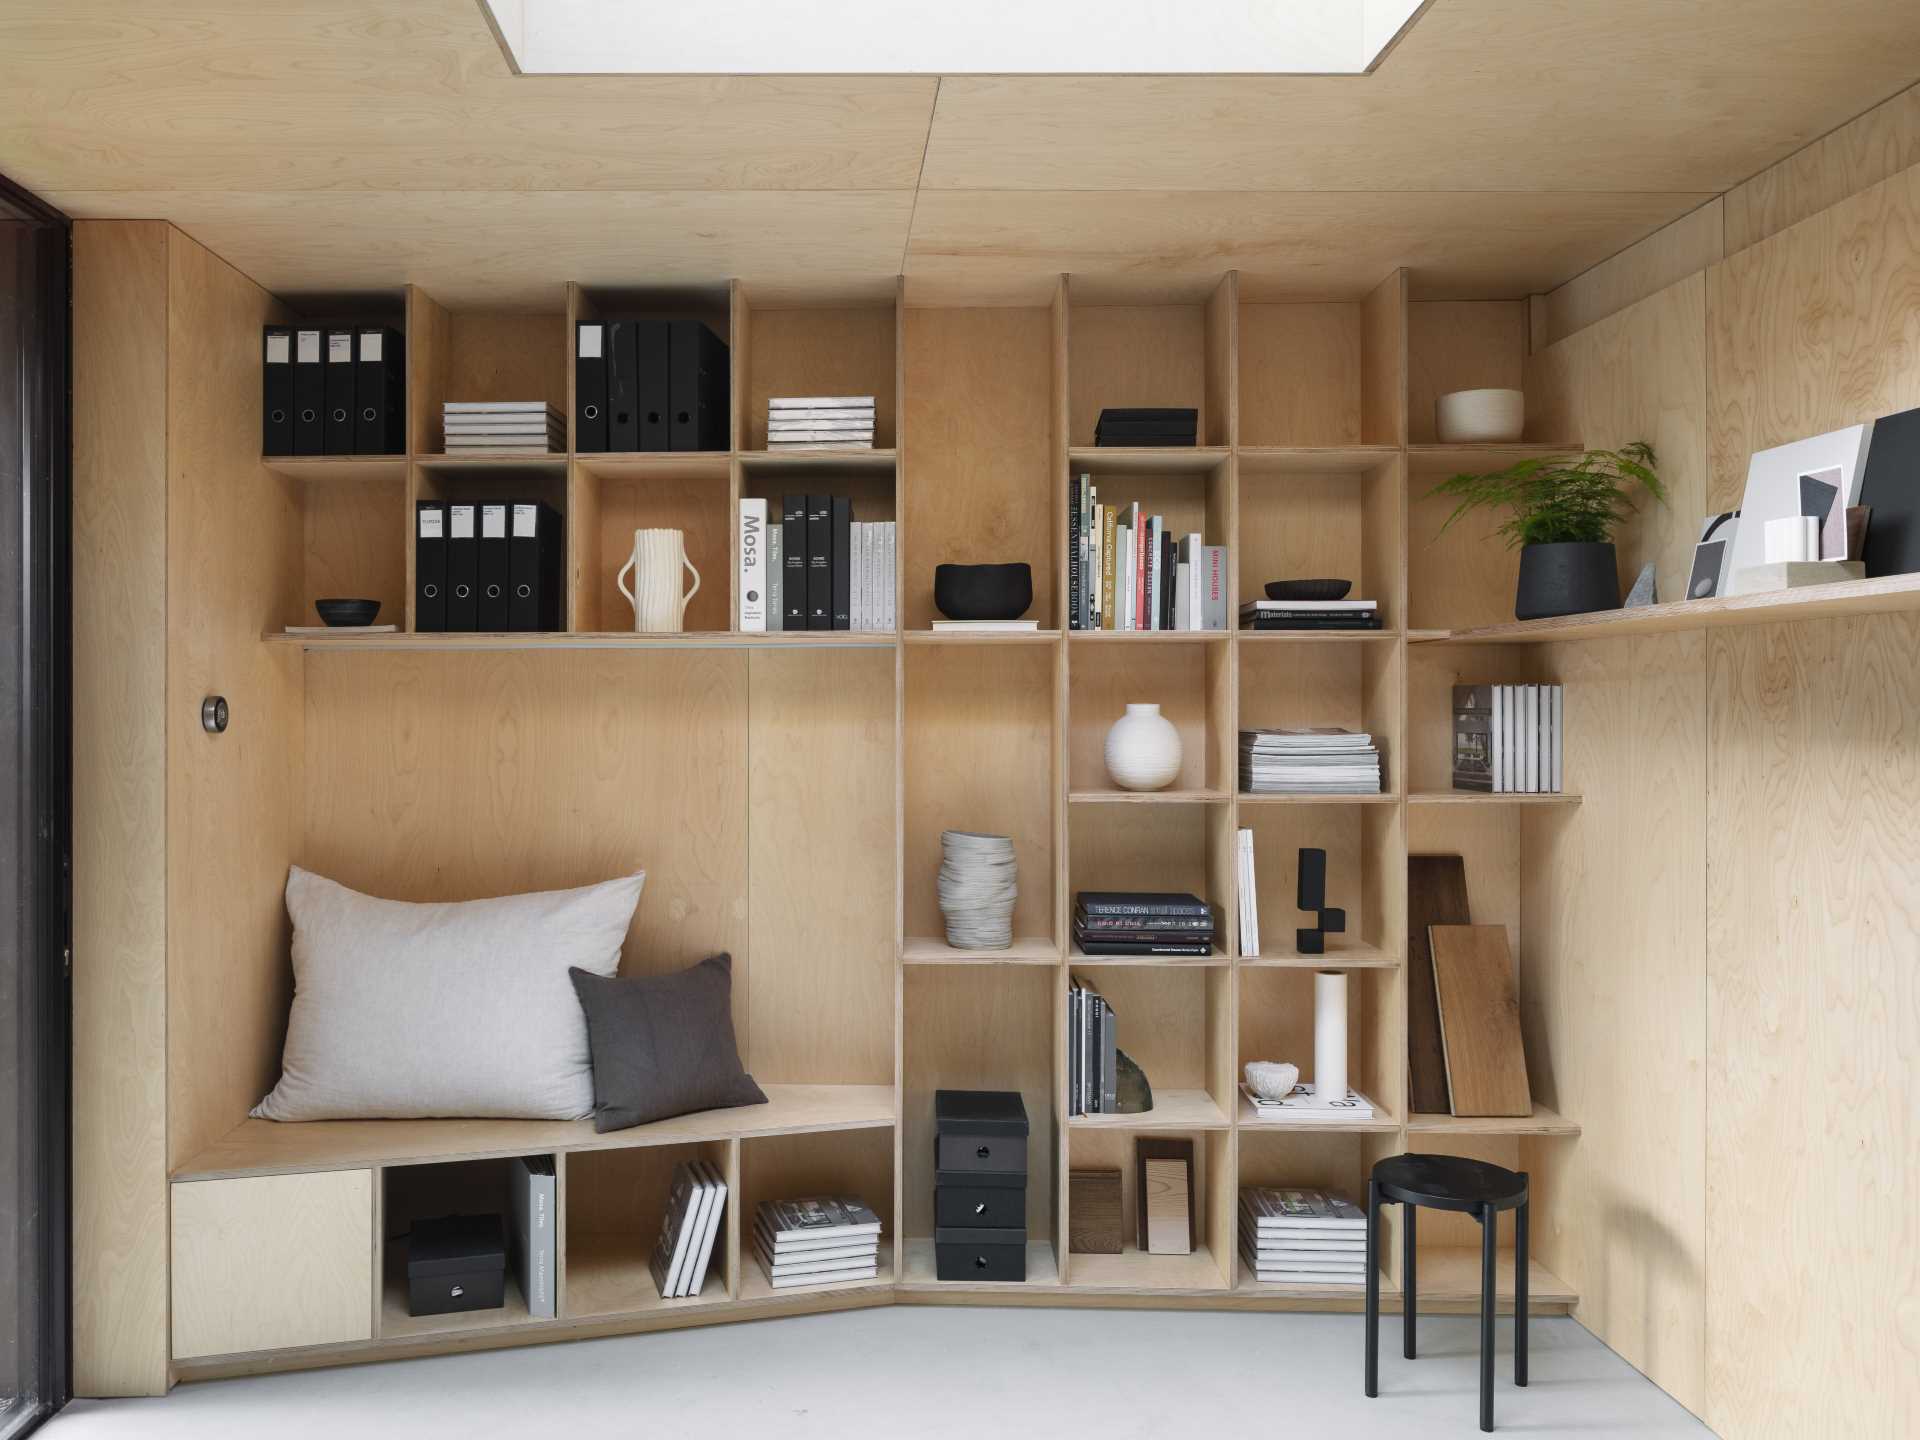 A backyard studio designed as an office includes a wall of bookshelves and a seating nook.